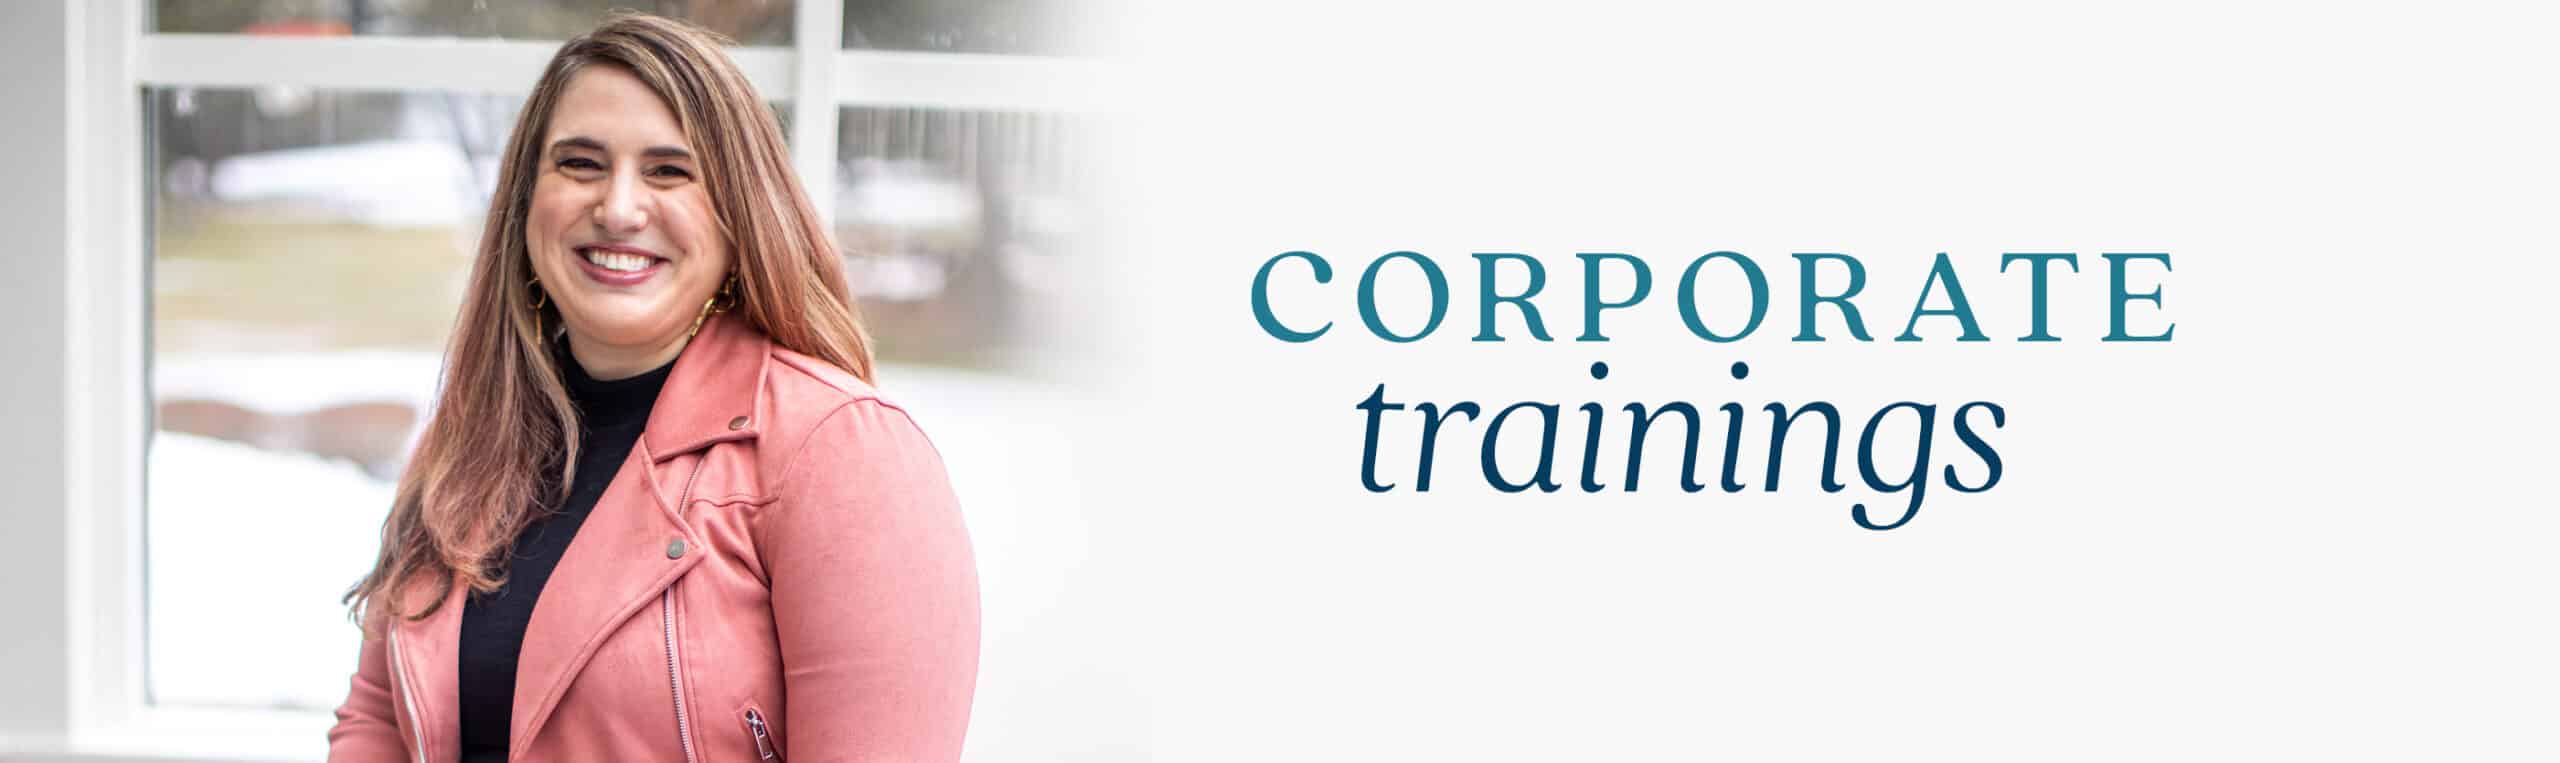 The lead master the media instructor wearing a pink jacket and smiling, next to text that says corporate trainings.